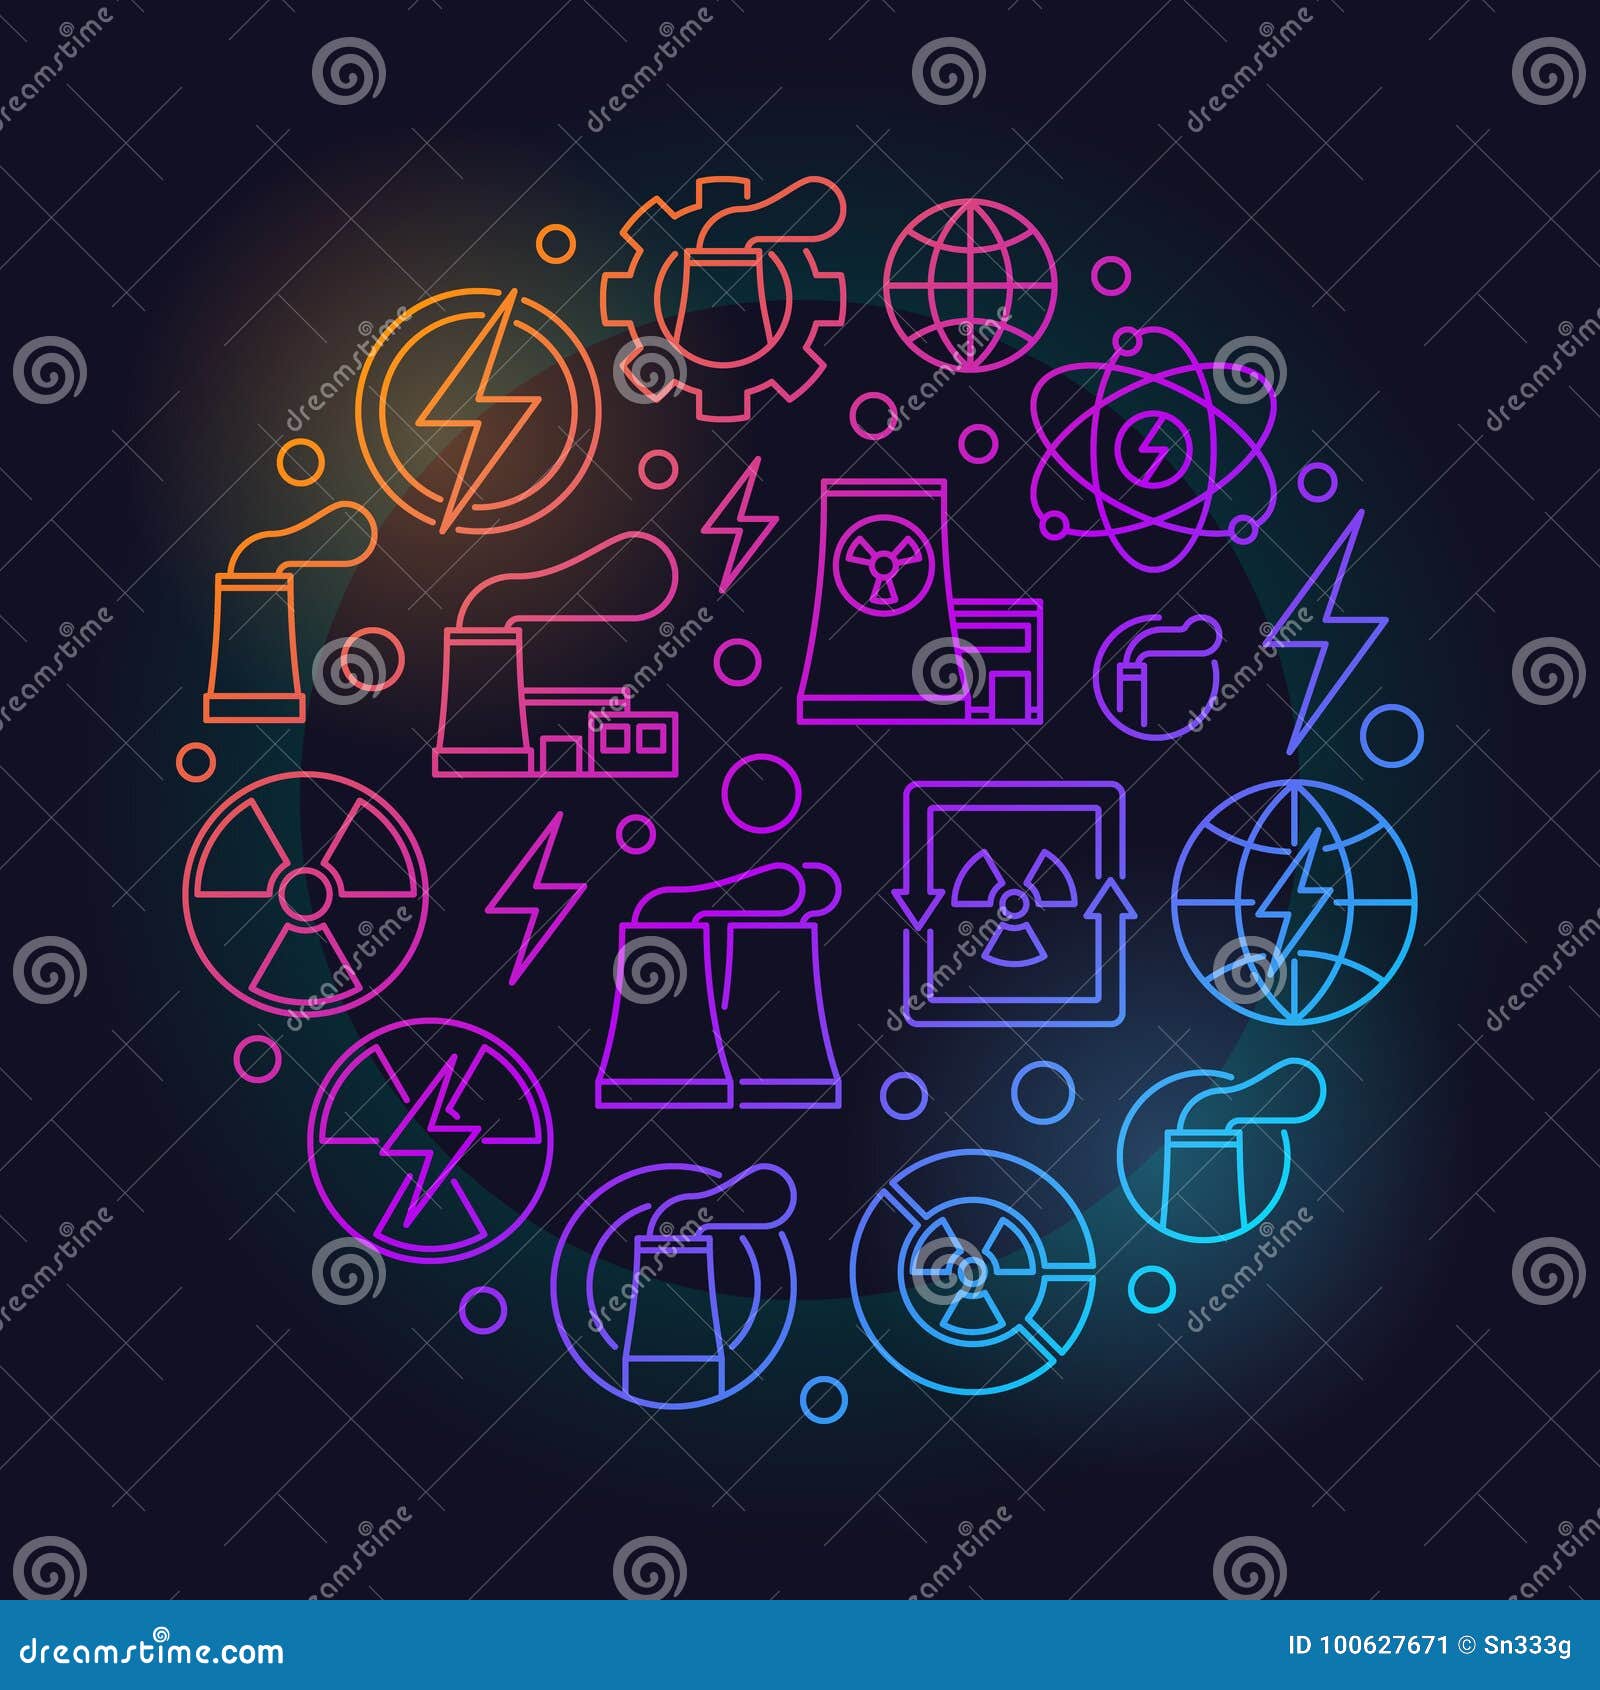 Nuclear Power Outline Colorful Illustration Stock Vector - Illustration